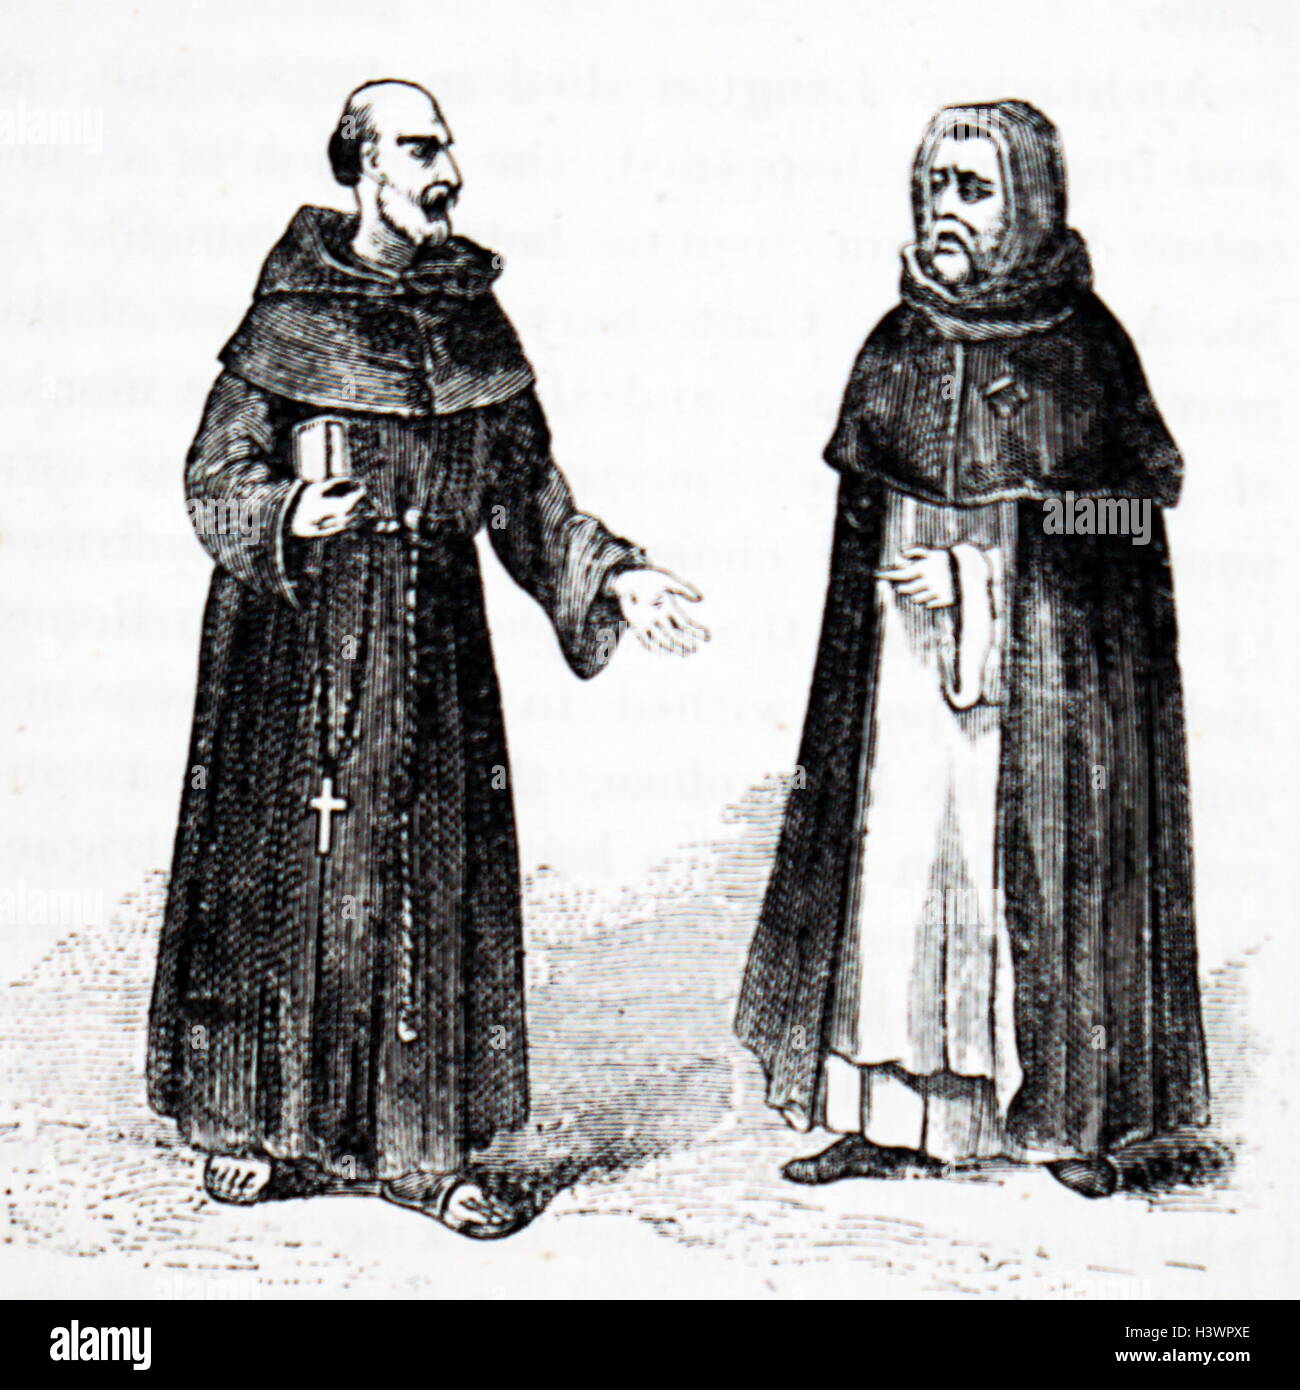 Engraving of a Franciscan and Dominican Monks both belonging to different Christian religious orders. Dated 15th Century Stock Photo